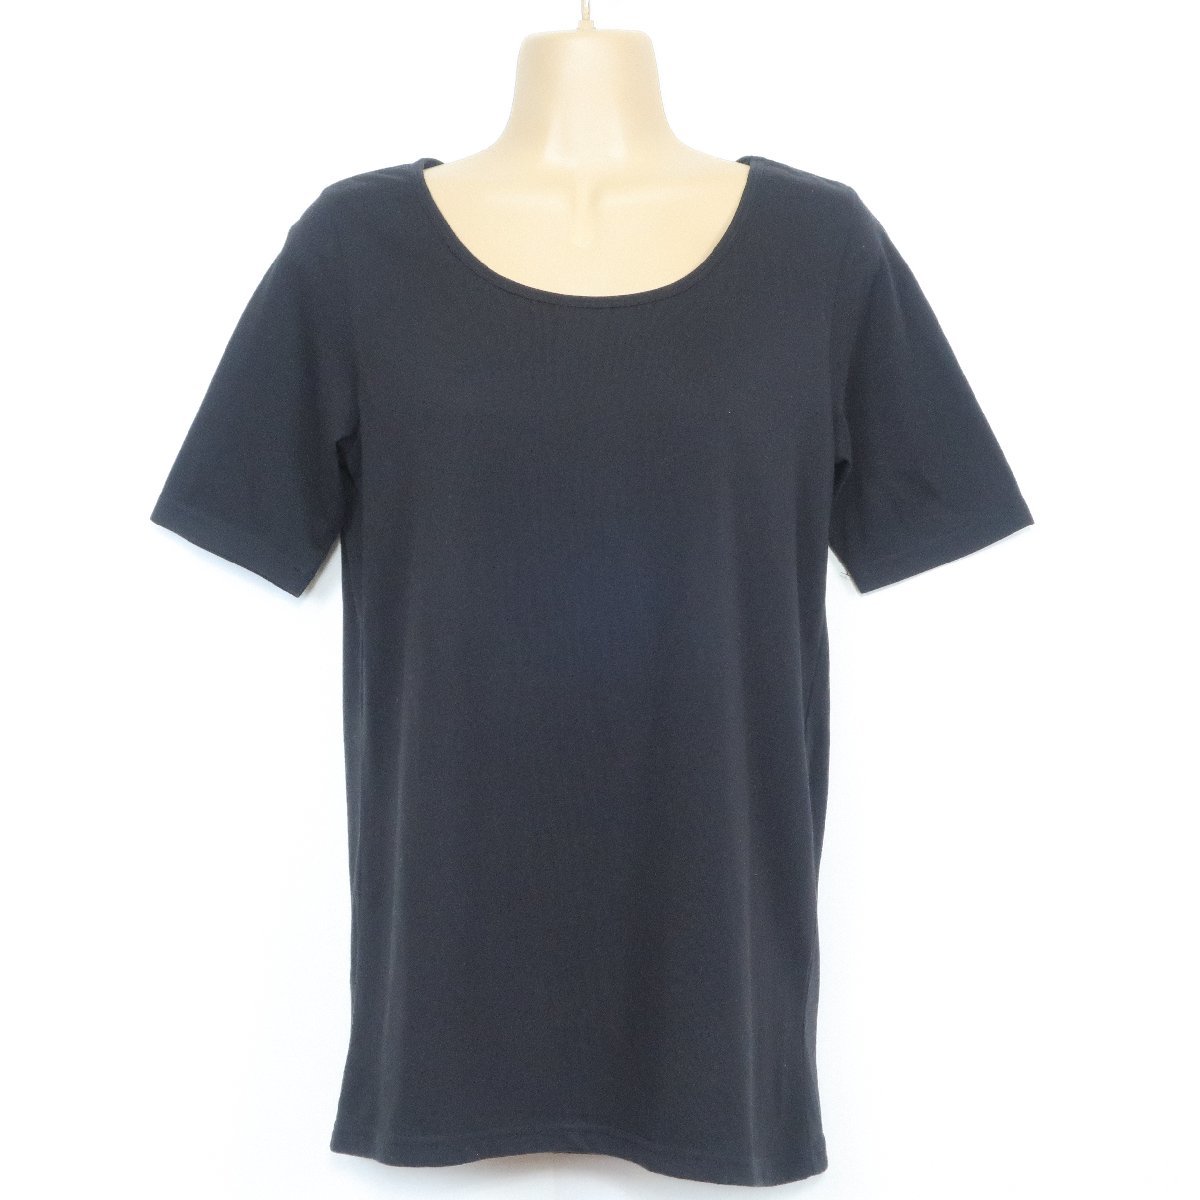 ASKNOWAS As Know As * stretch material crew neck short sleeves T-shirt free black series spring summer thing *b6982